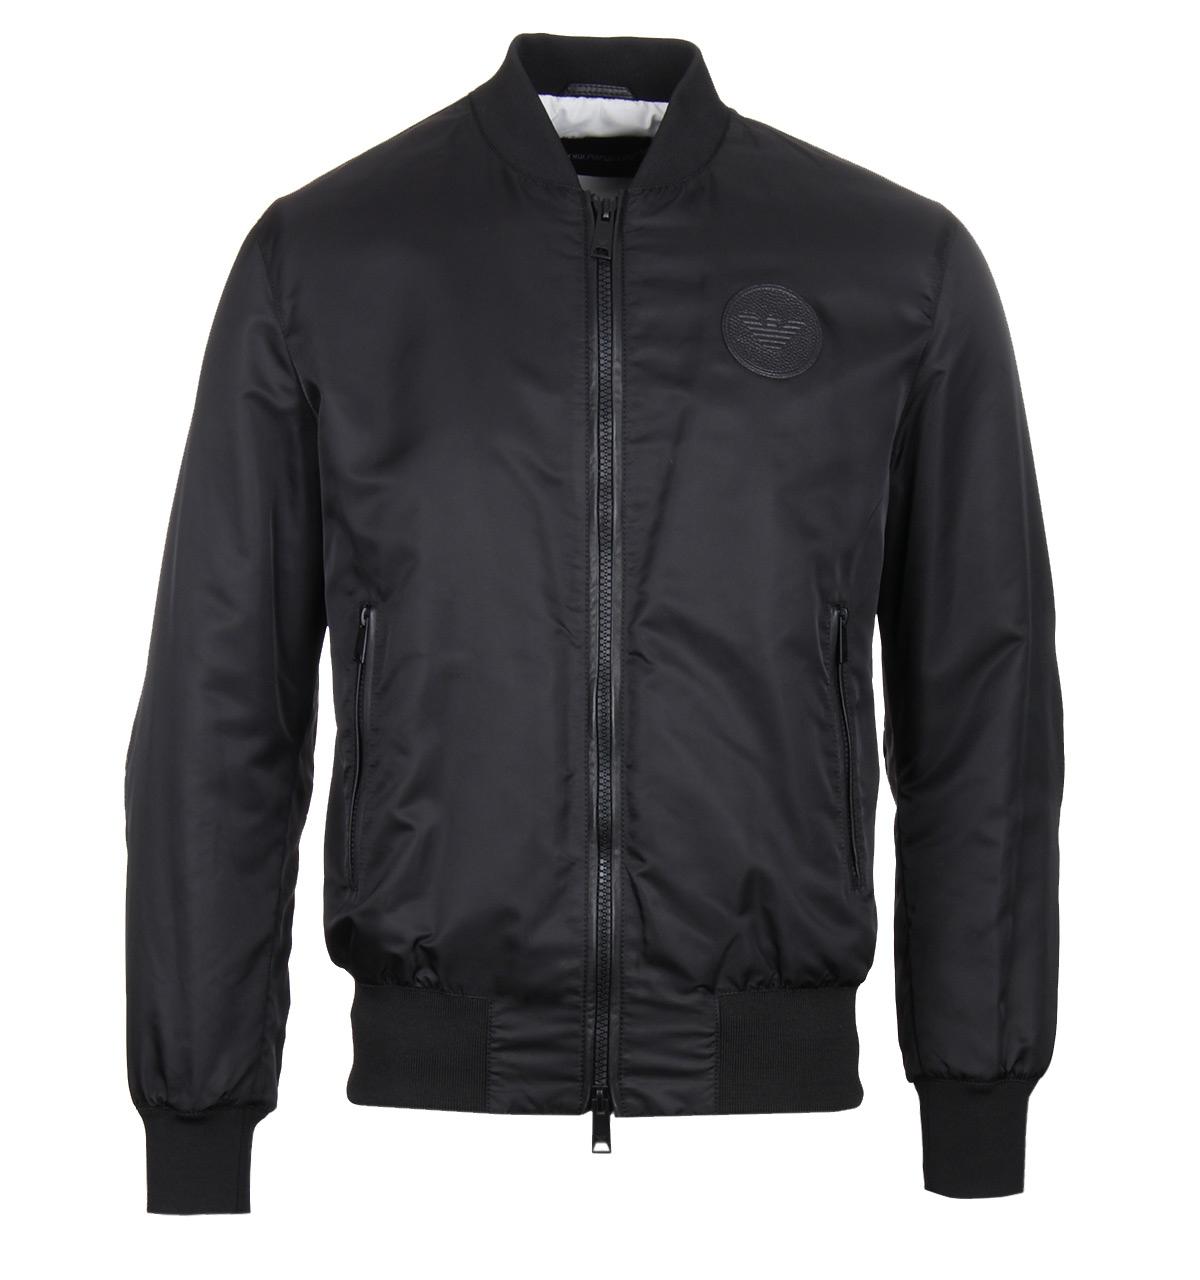 Emporio Armani Leather Logo Patch Bomber Jacket in Black for Men - Lyst